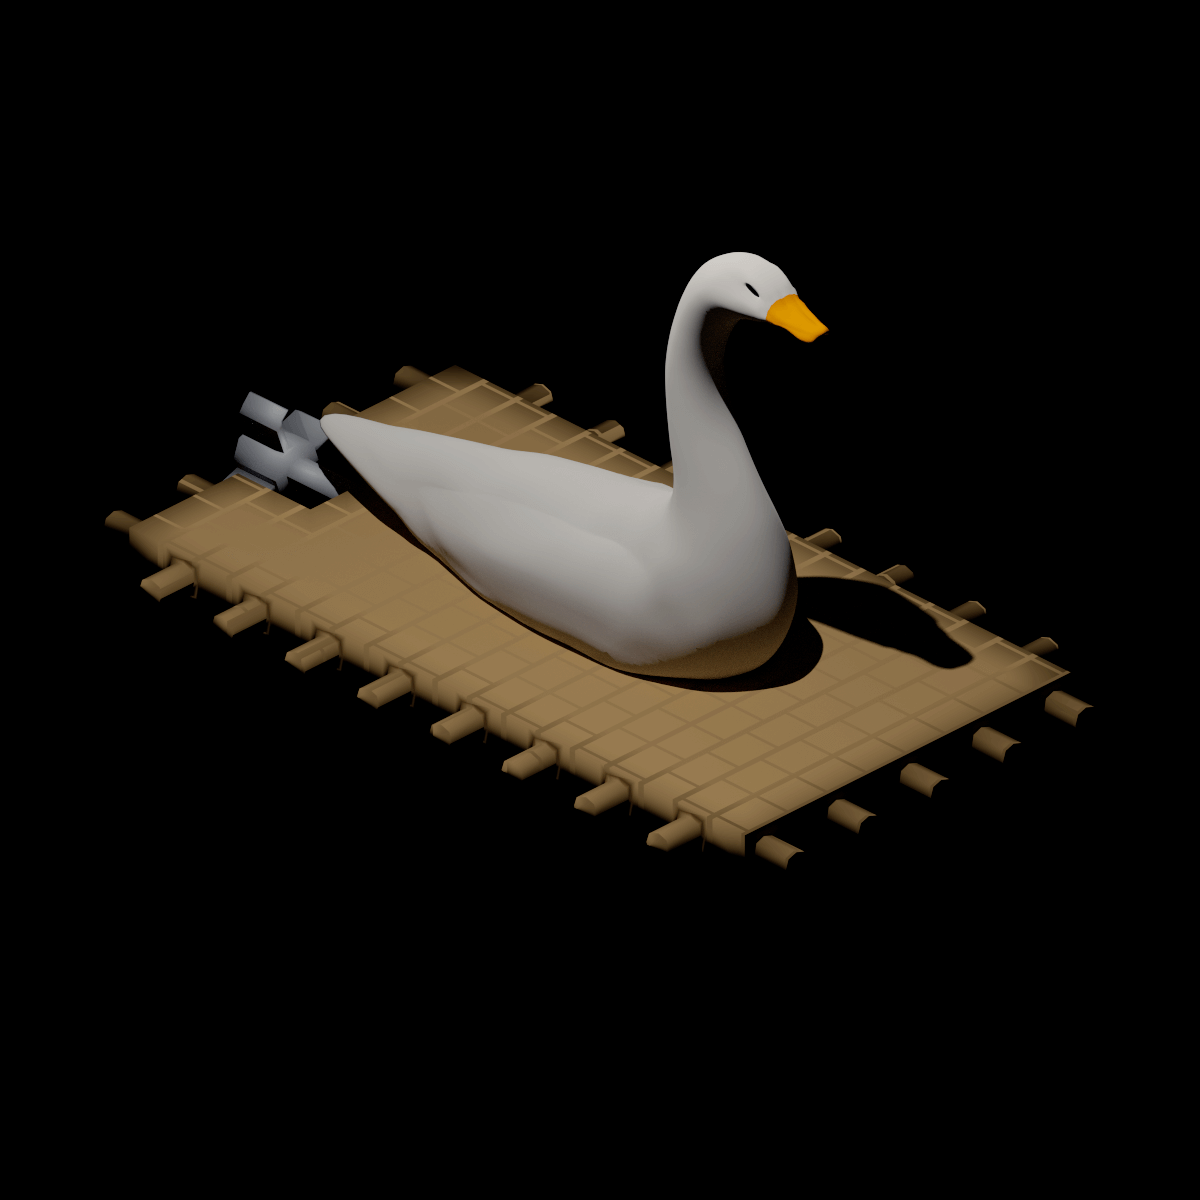 A float design featuring a goose or duck on a large platform.